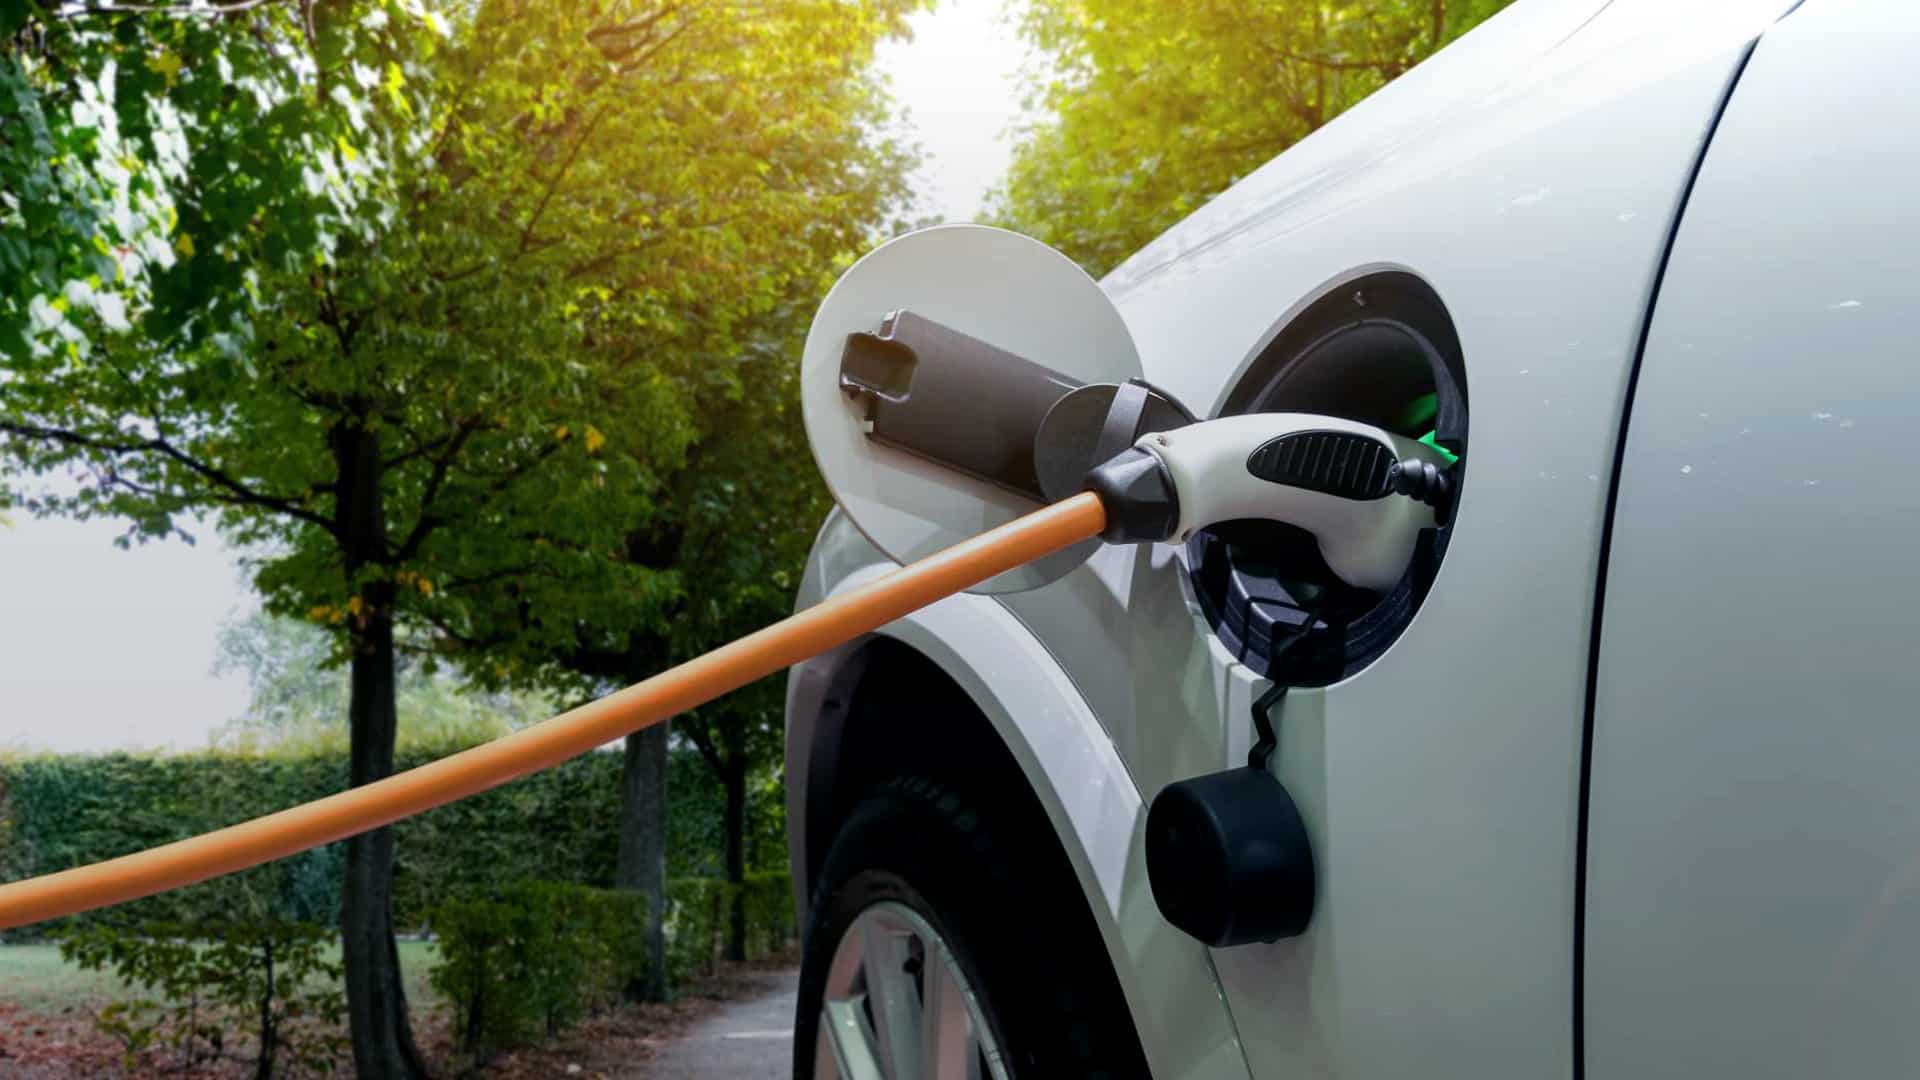 Carzonrent partners with EV charging service firm Fortum Charge